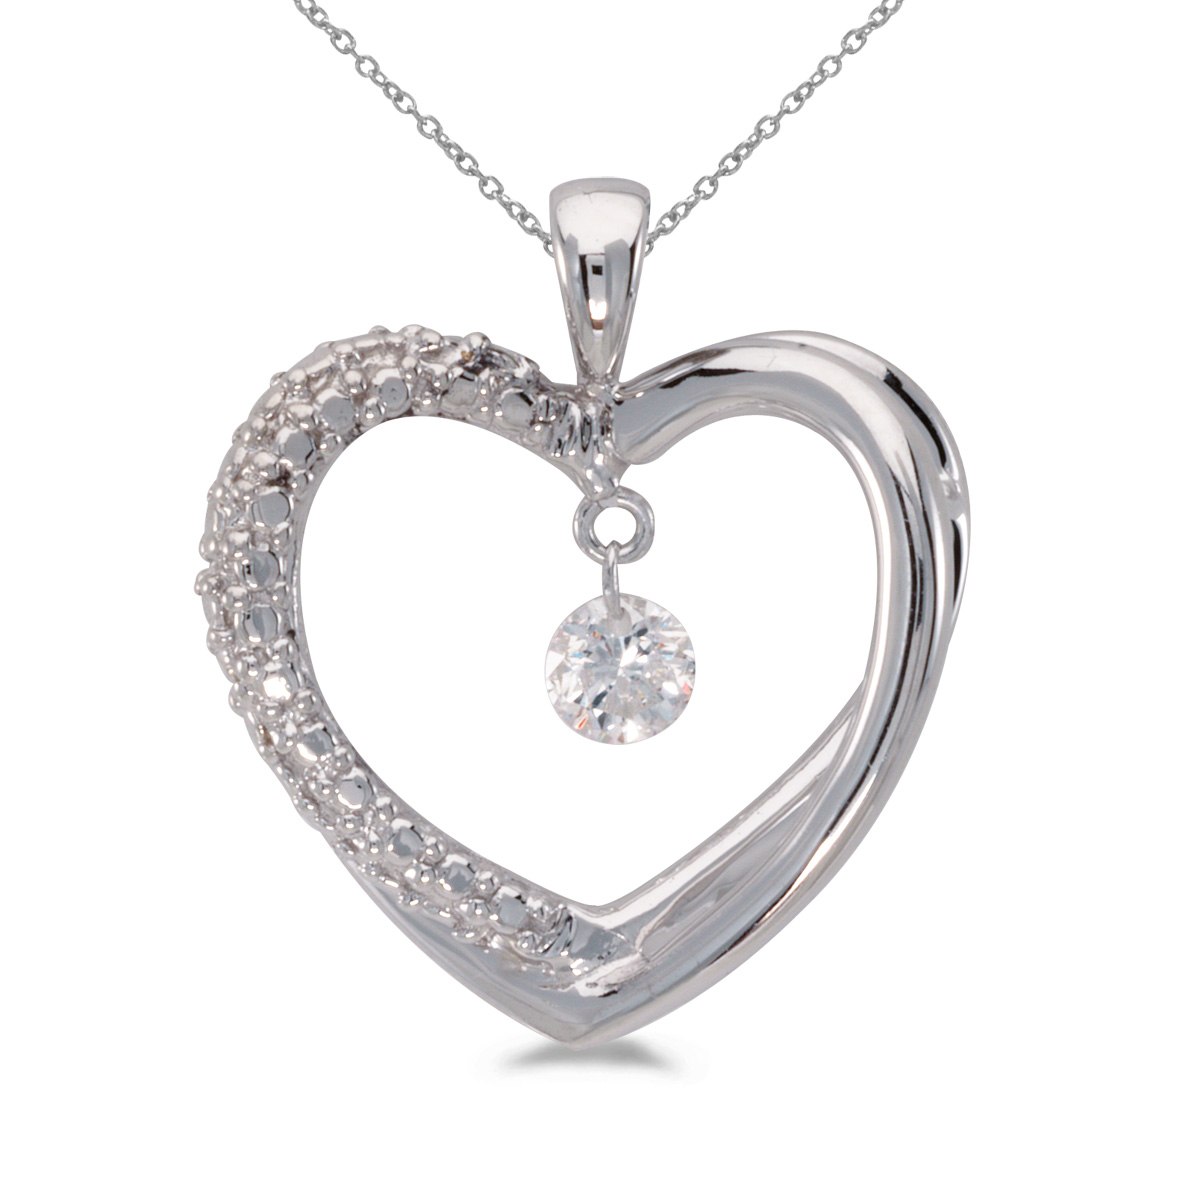 JCX2896: 14k gold Dashinng Diamonds pendant with 0.10 total ct diamonds. The center dangling diamond dances and shimmers with every heartbeat.